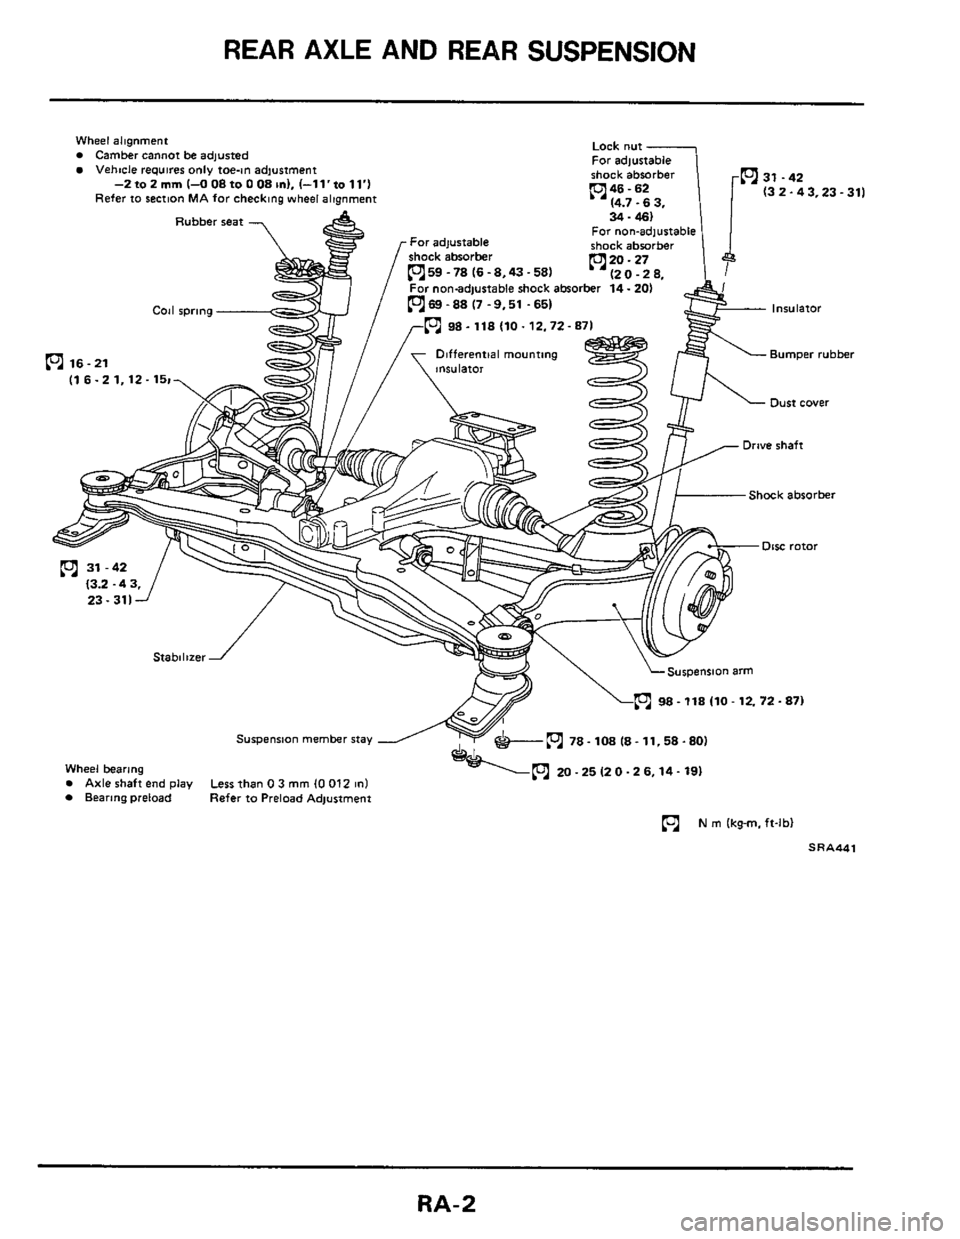 NISSAN 300ZX 1984 Z31 Rear Suspension Workshop Manual REAR  AXLE AND REAR  SUSPENSION 
Wheel alignment Camber Cannot be adjusted Vehtcle requires only toe-in adjustment 
(3 2-43.23-311 
Rubber seat For non-adjustable 
059 -78 (6 -8.43.58) 
For non-adjust